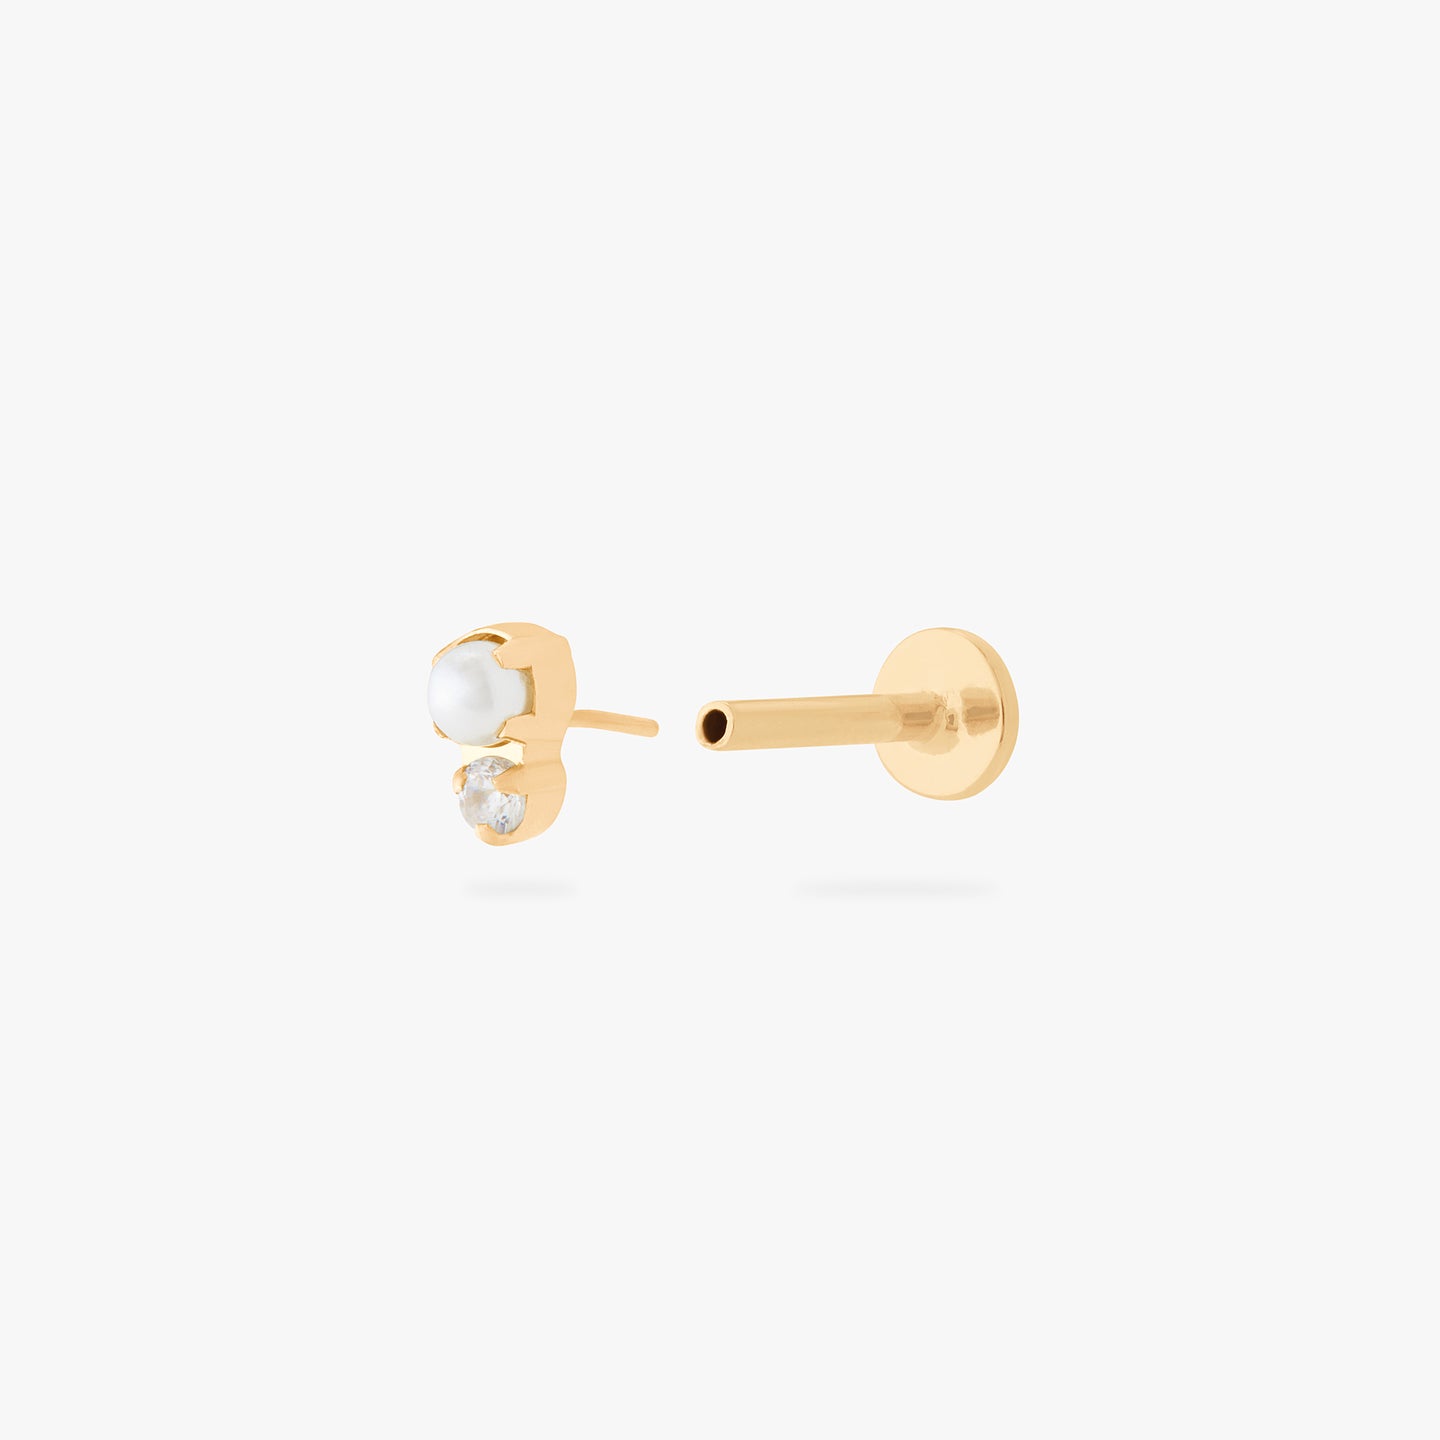 This is an image of a flatback top which has a pearl stacked over gold/clear CZ and then a gold labret that has a circle disc with the 